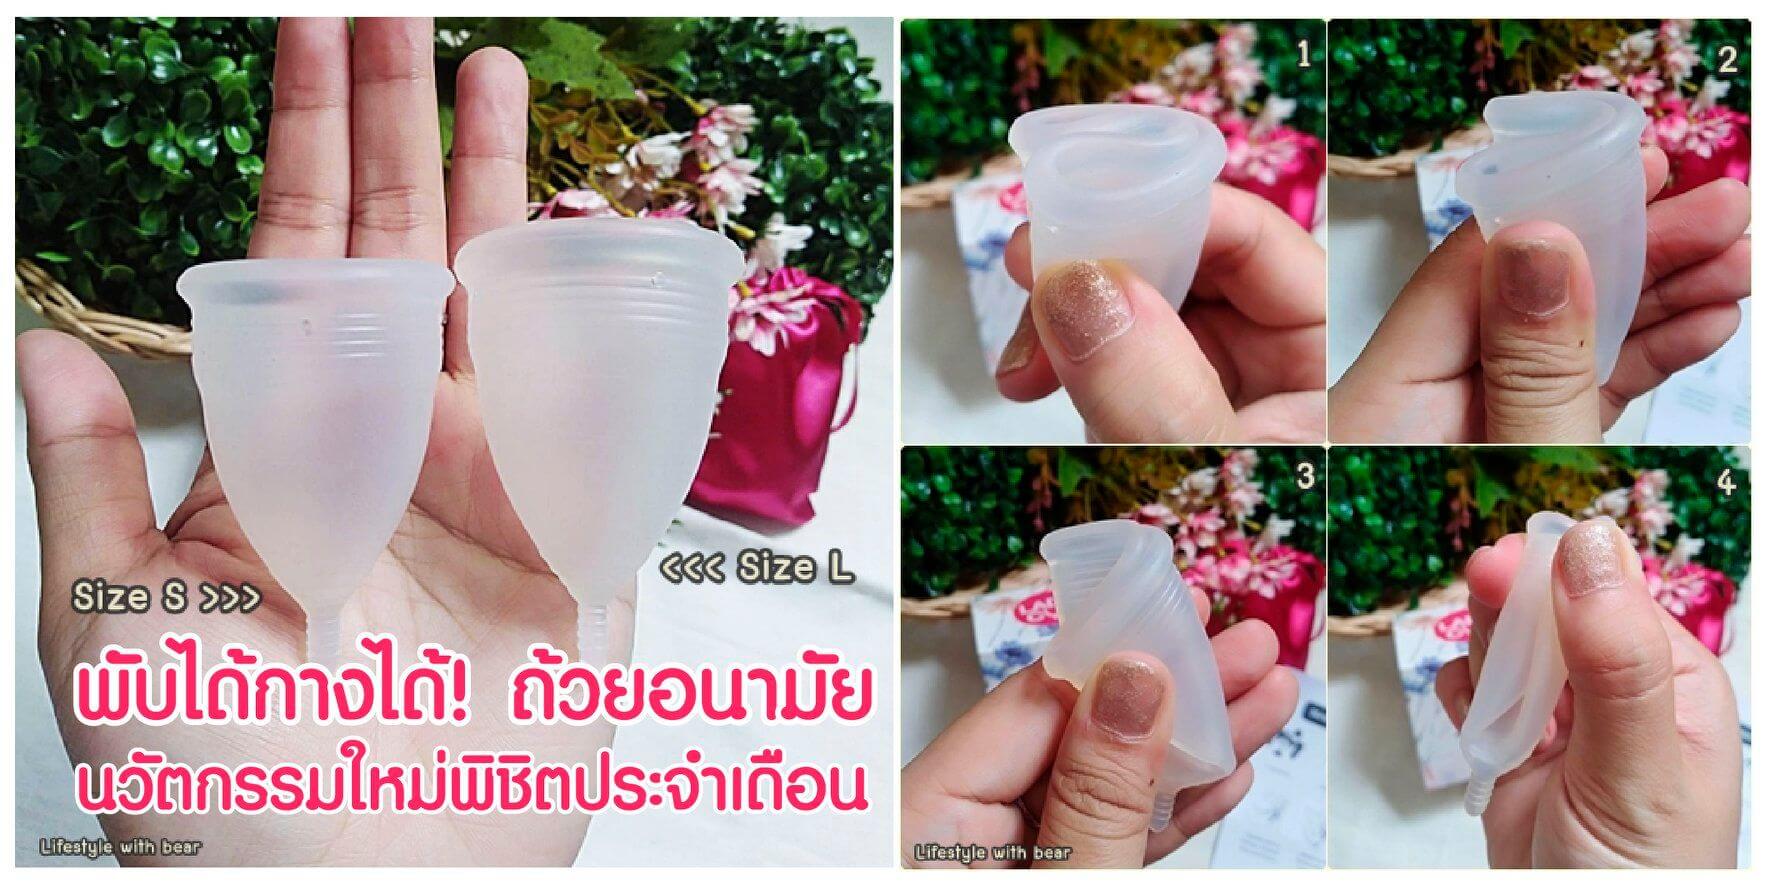 Lady Cup  , Lady Cup ถ้วยอนามัย , ถ้วยอนามัย ,  Menstrual Cup  , Lady Cup Menstrual Cup , 